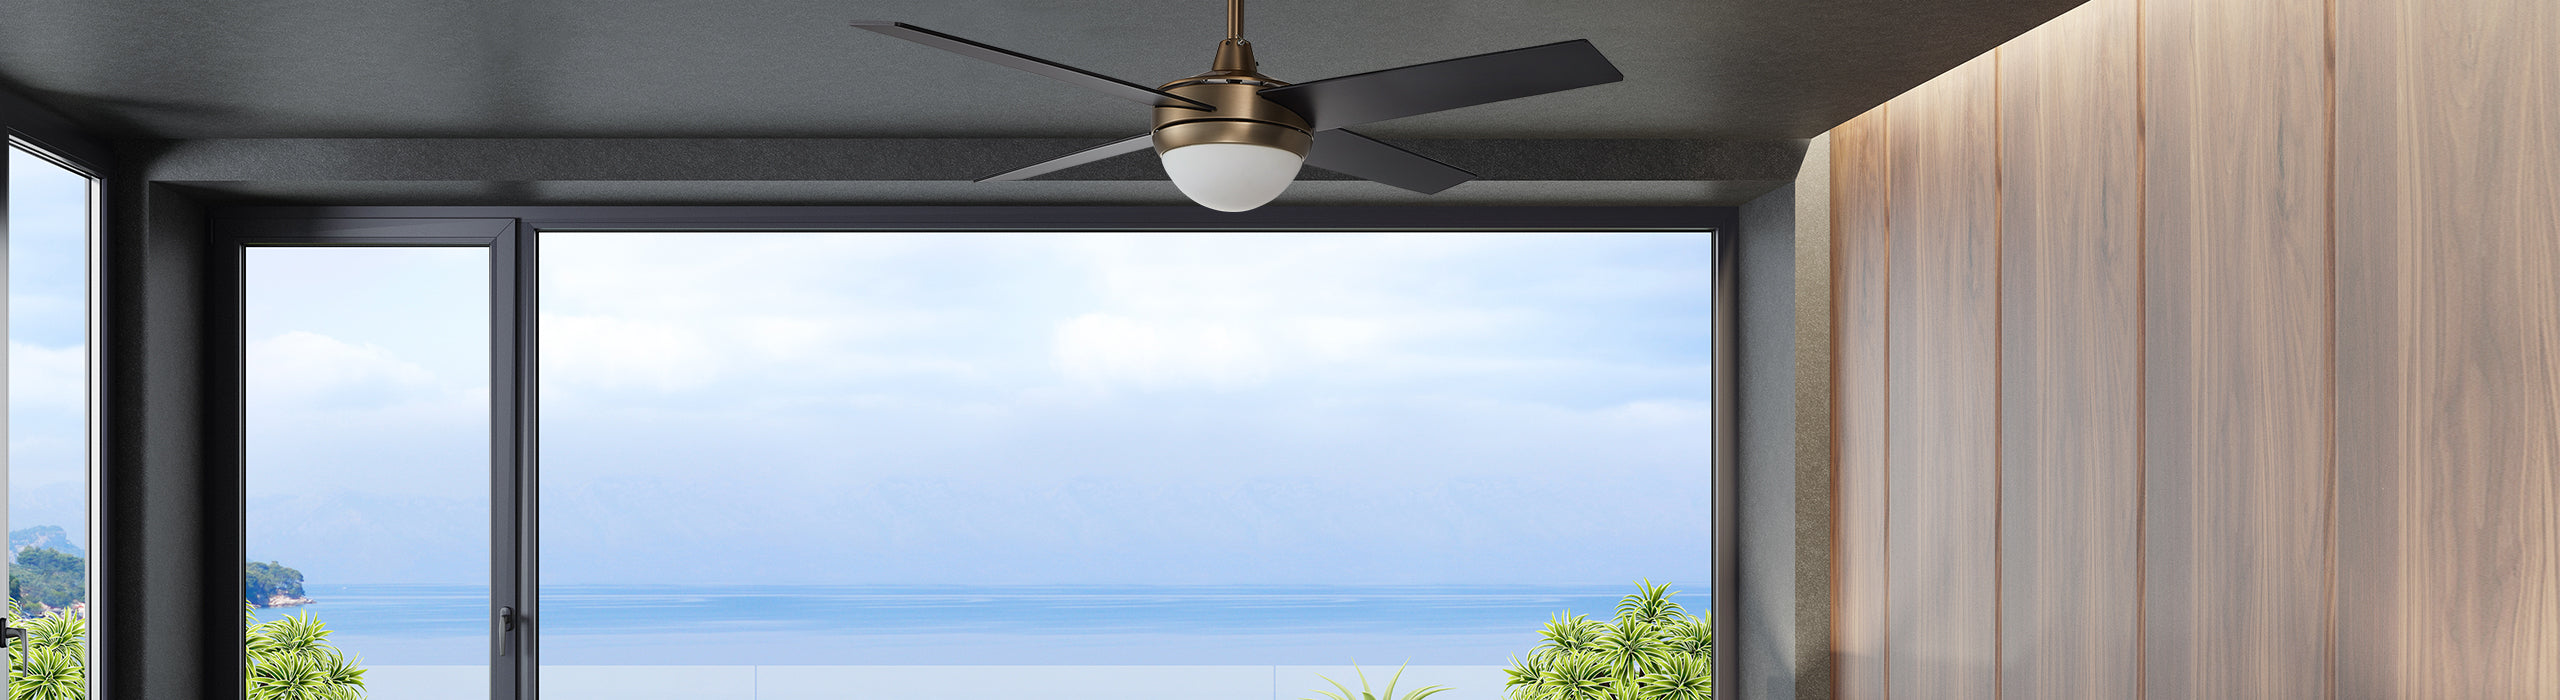 Smafan Small Size Ceiling Fan Powerful Cooling And Lighting